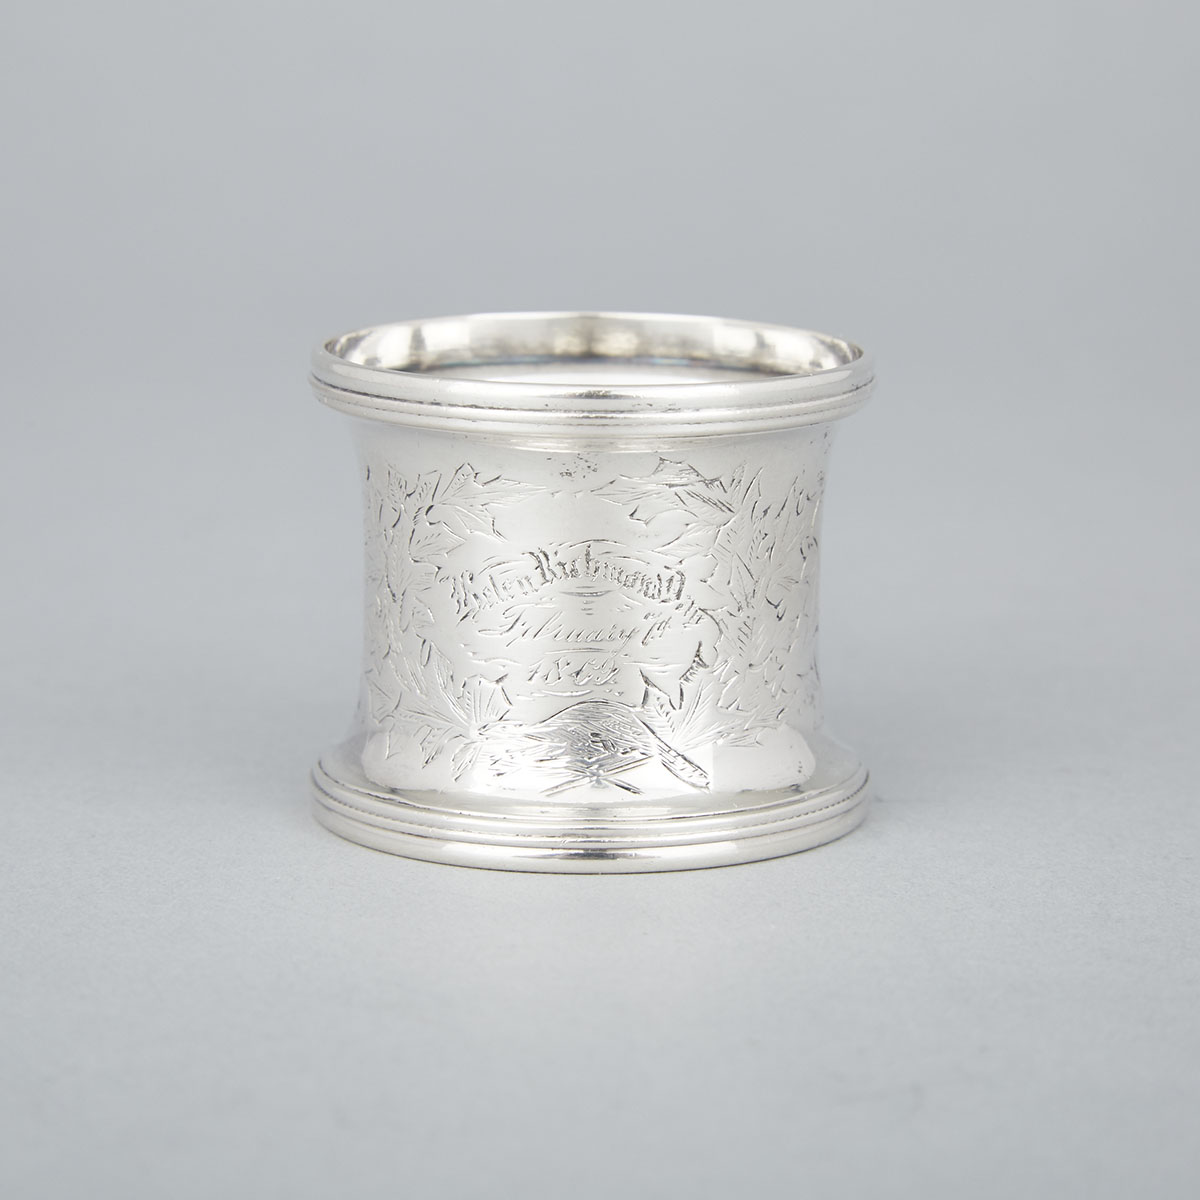 Canadian Silver Napkin Ring, Robert Hendery, Montreal, Que., c.1869